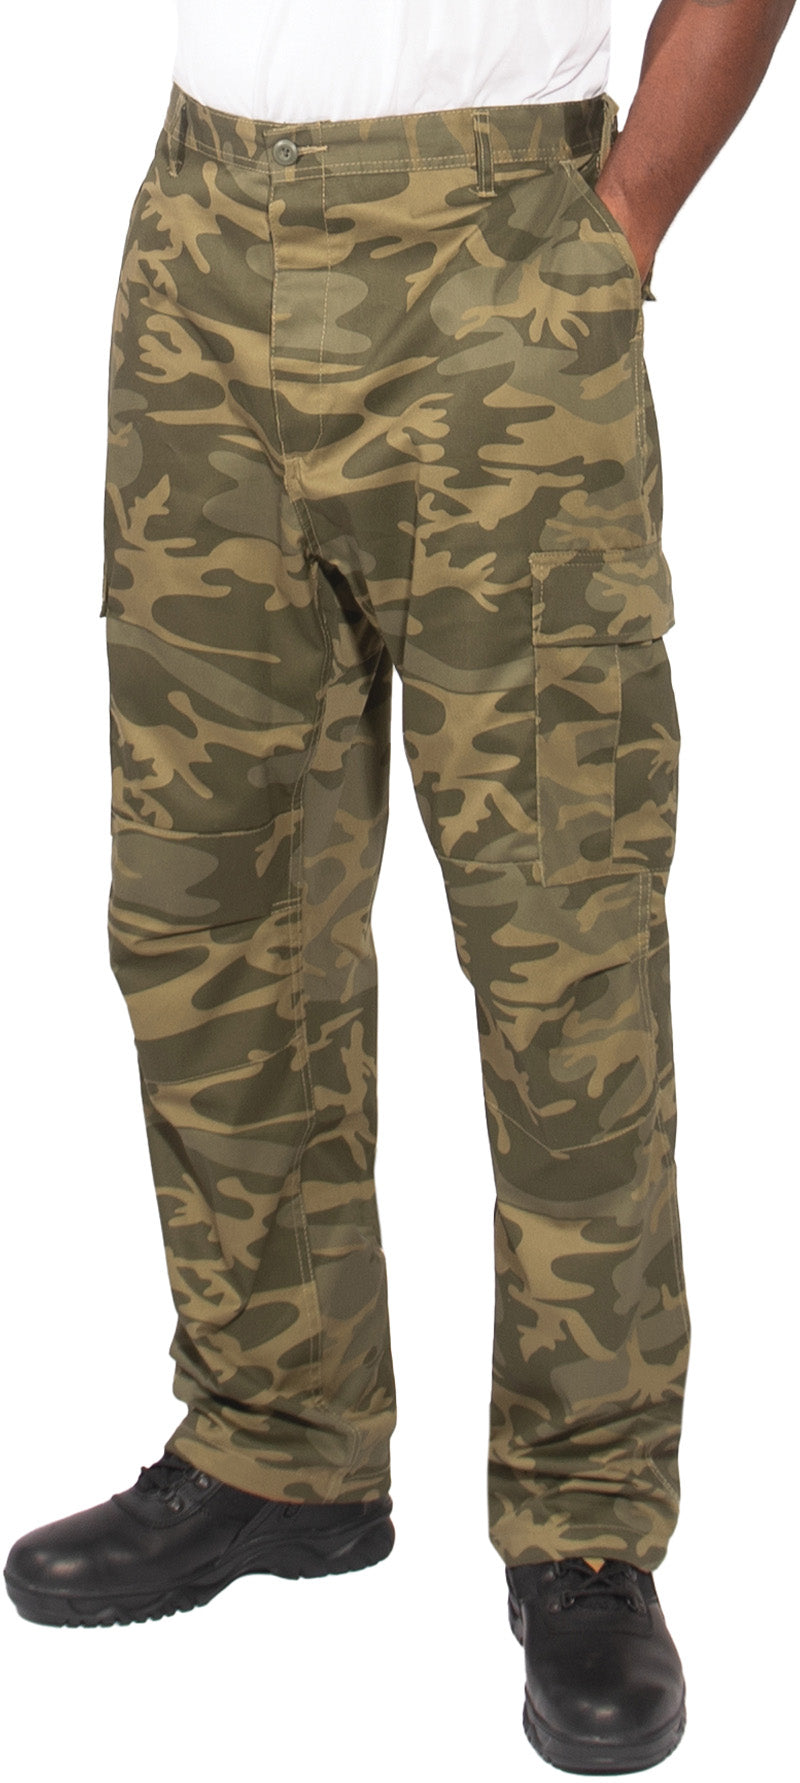 Olive Drab Solid Military Rip-Stop BDU Cargo Fatigue Pants